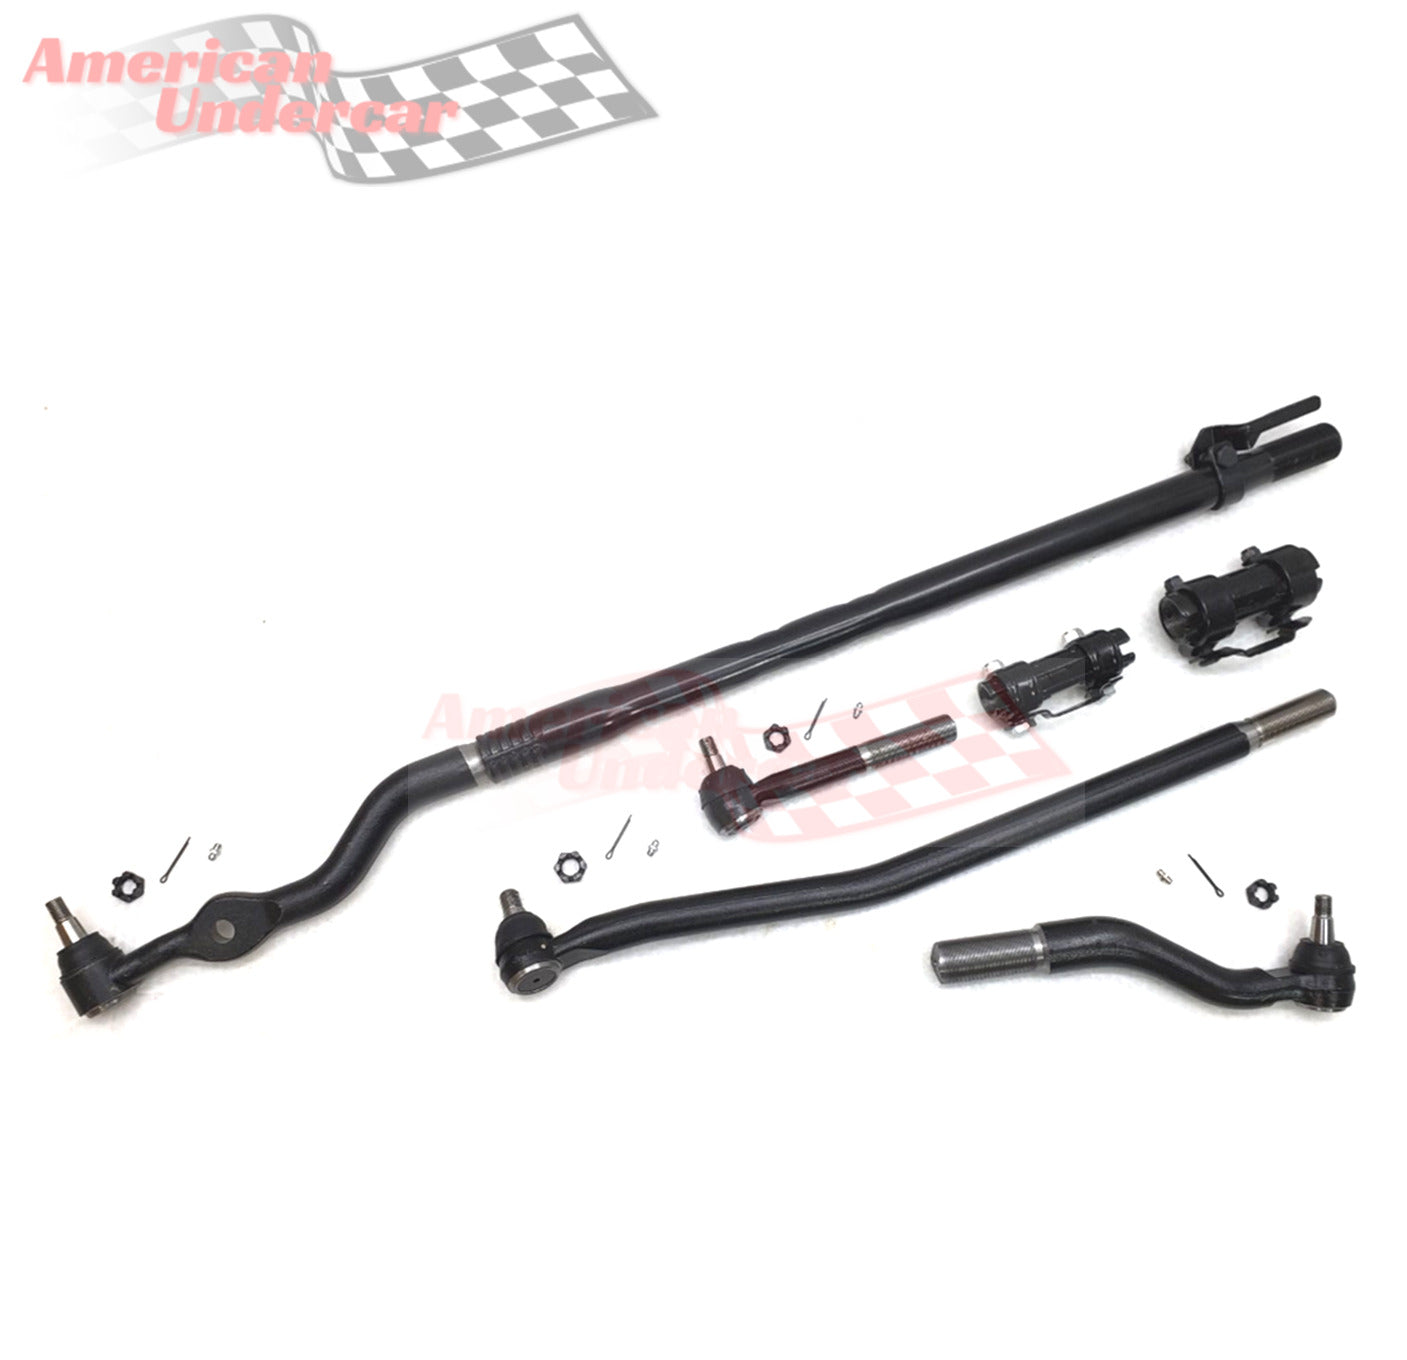 HD Drag Link Tie Rod Steering Kit for 1999-2004 Ford F450 Super Duty 2WD